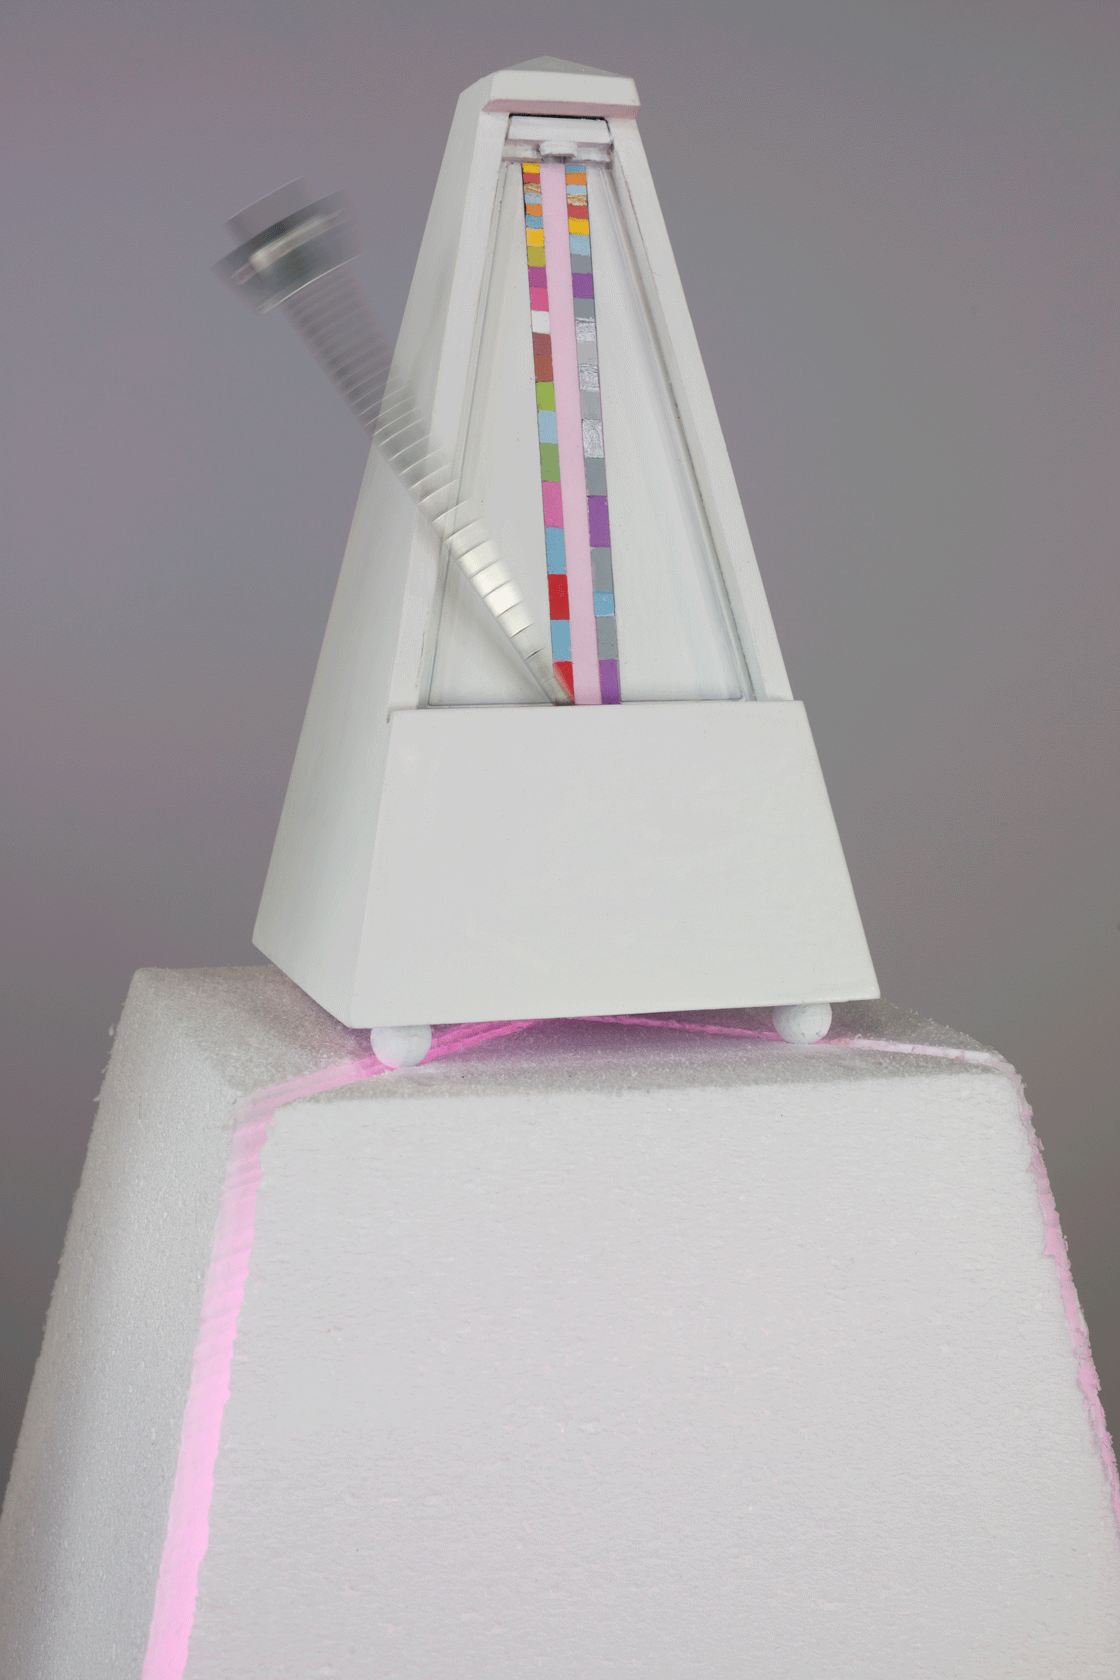 The metronome scultpure in action